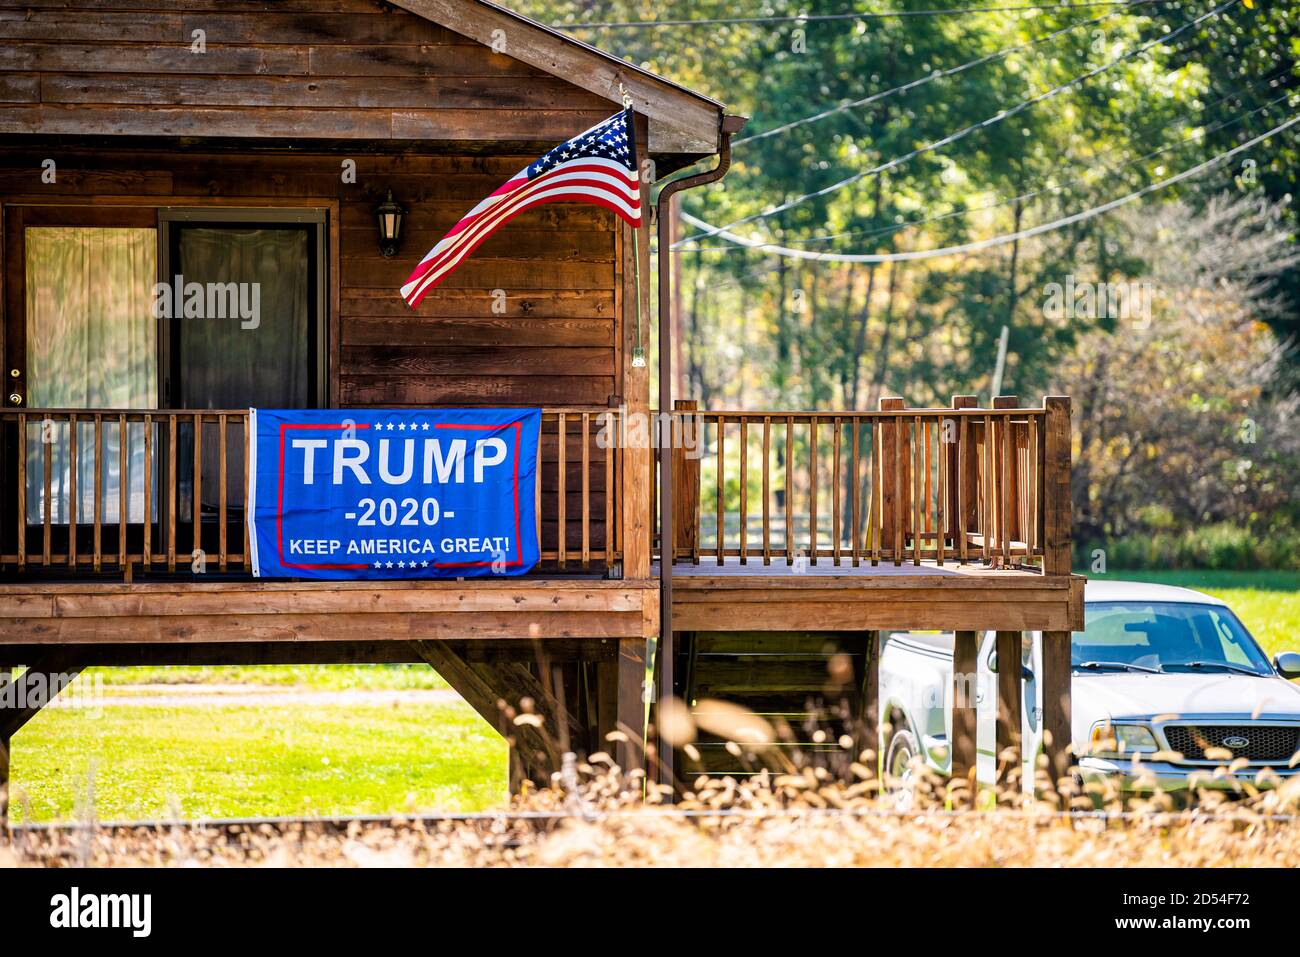 Bartow, USA - October 6, 2020: Town in West Virginia countryside and sign on house building for Trump political election banner in Durbin Frank area Stock Photo